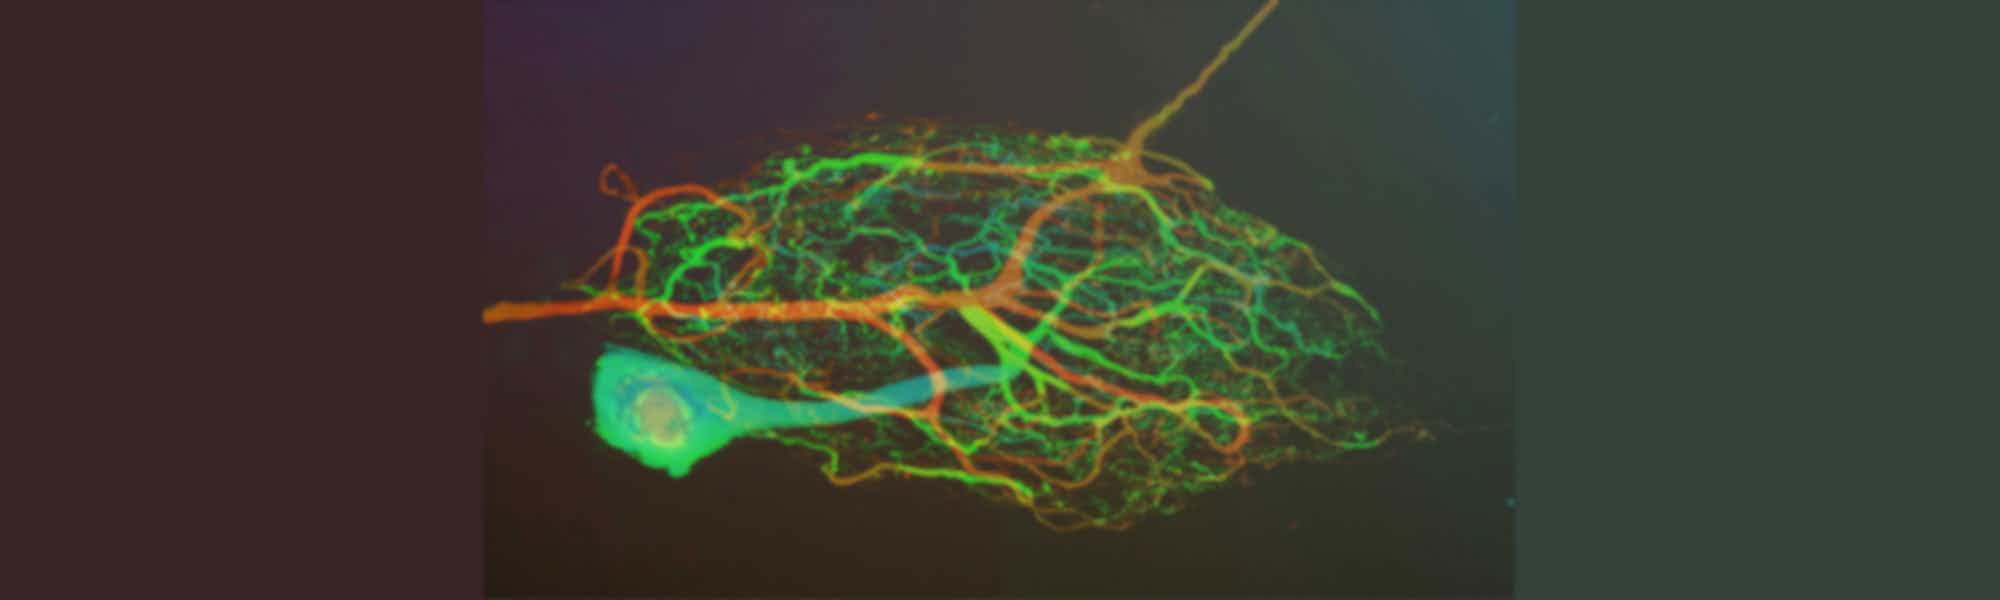 Using Scientifica electrophysiology equipment to investigate blue light responses in crab stomatogastric ganglion neurons